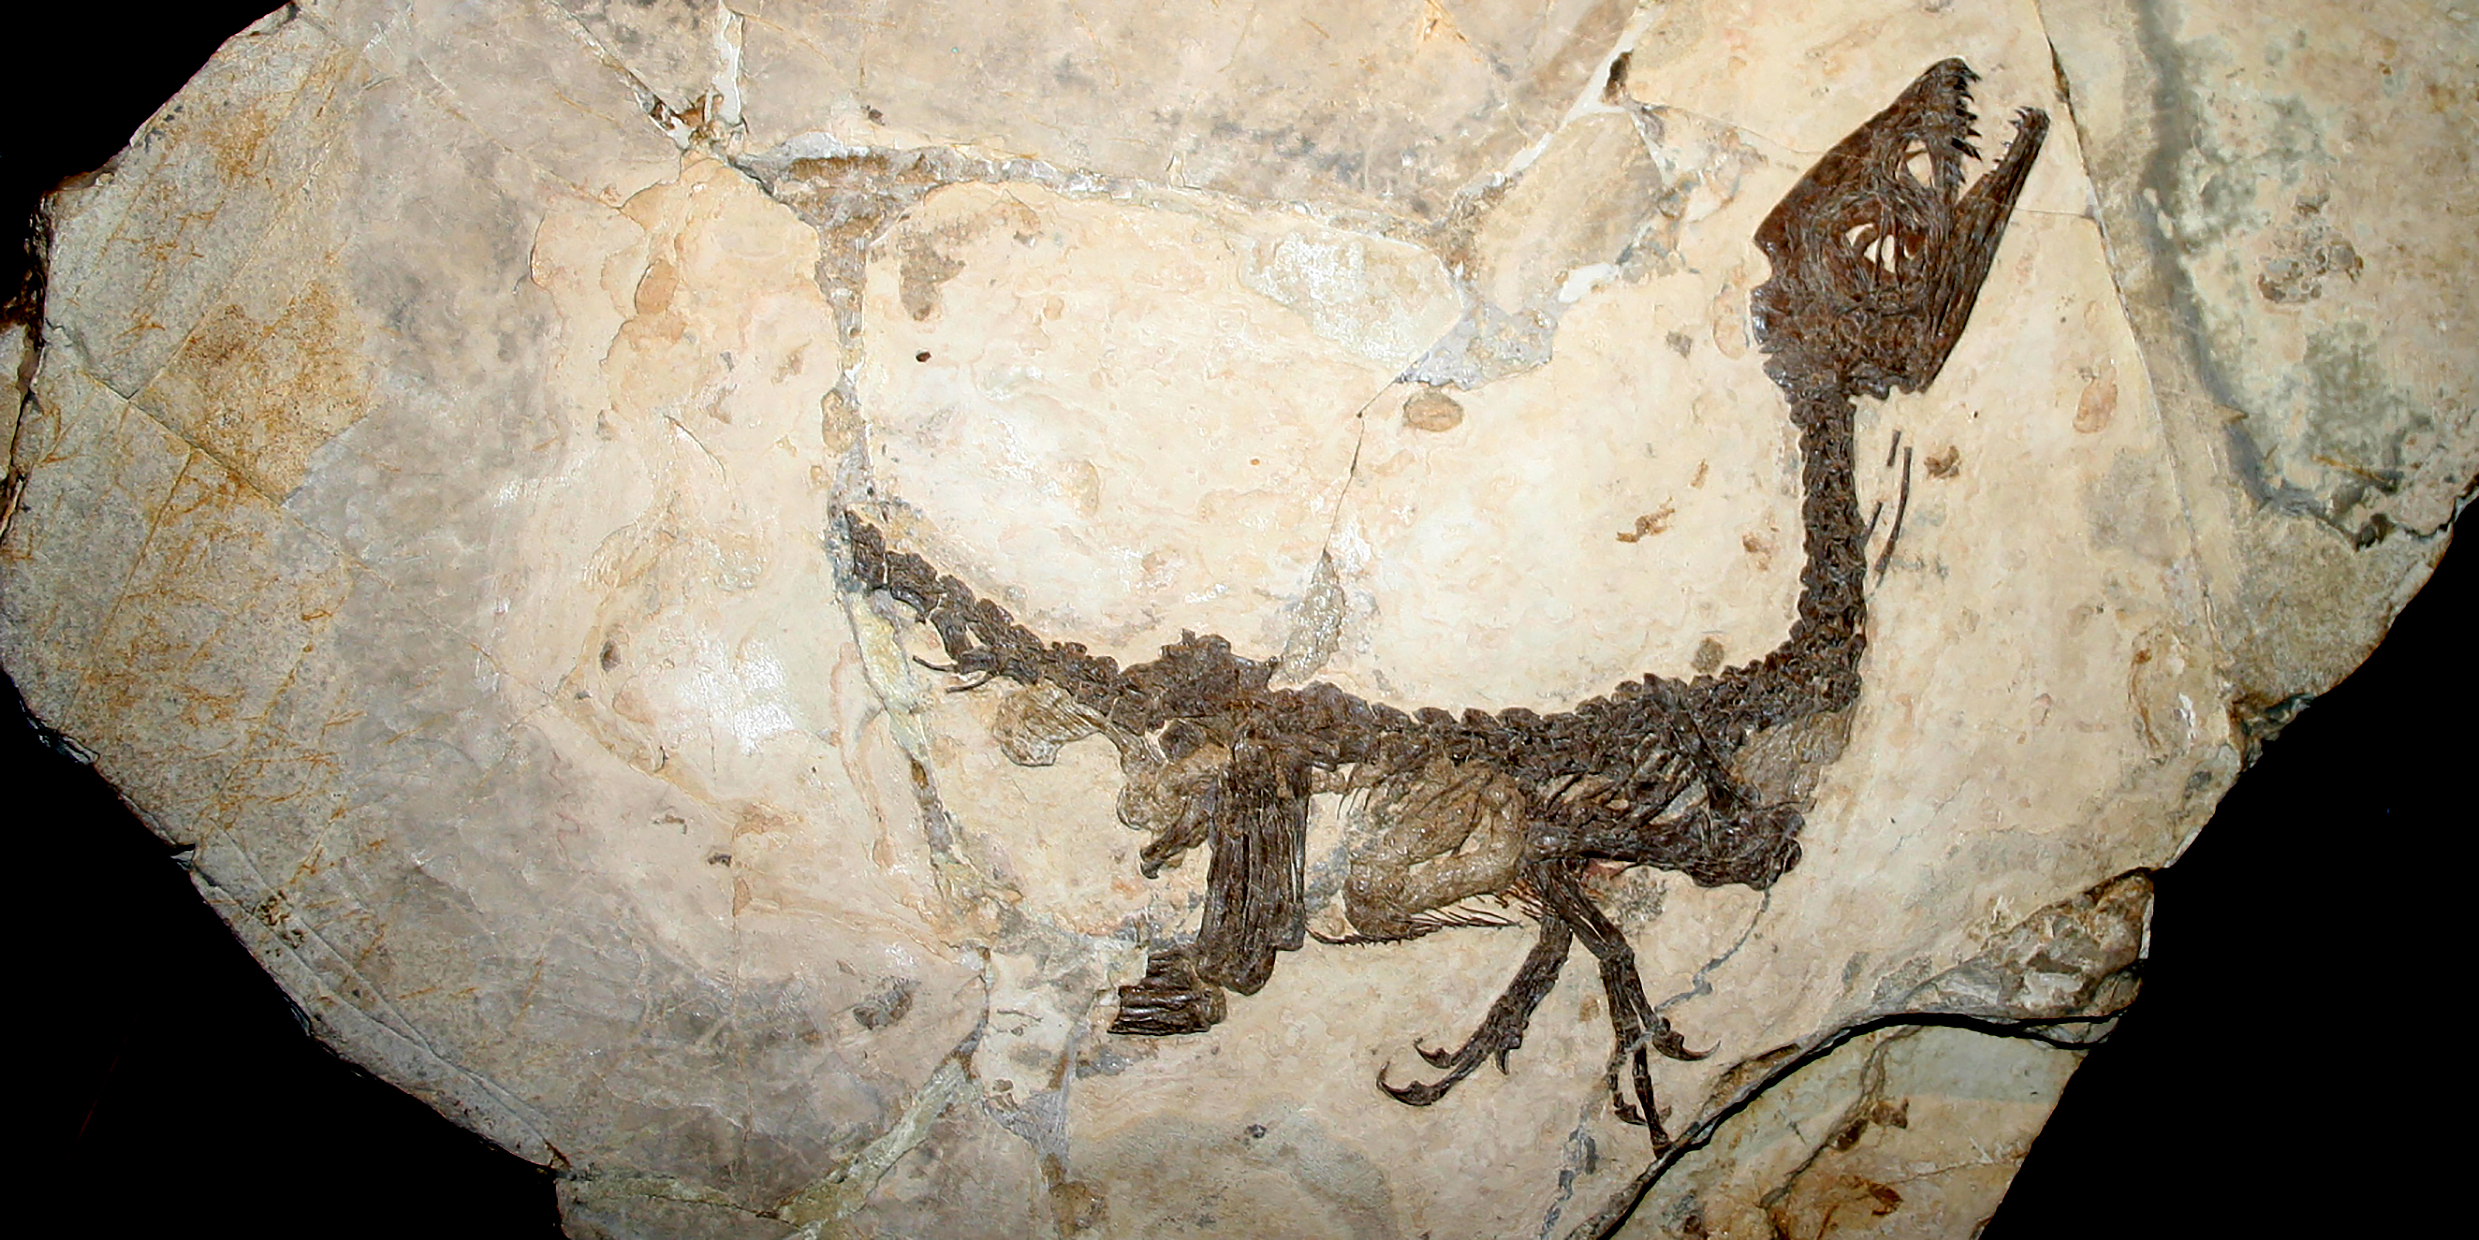 Image of a well-preserved dinosaur fossil